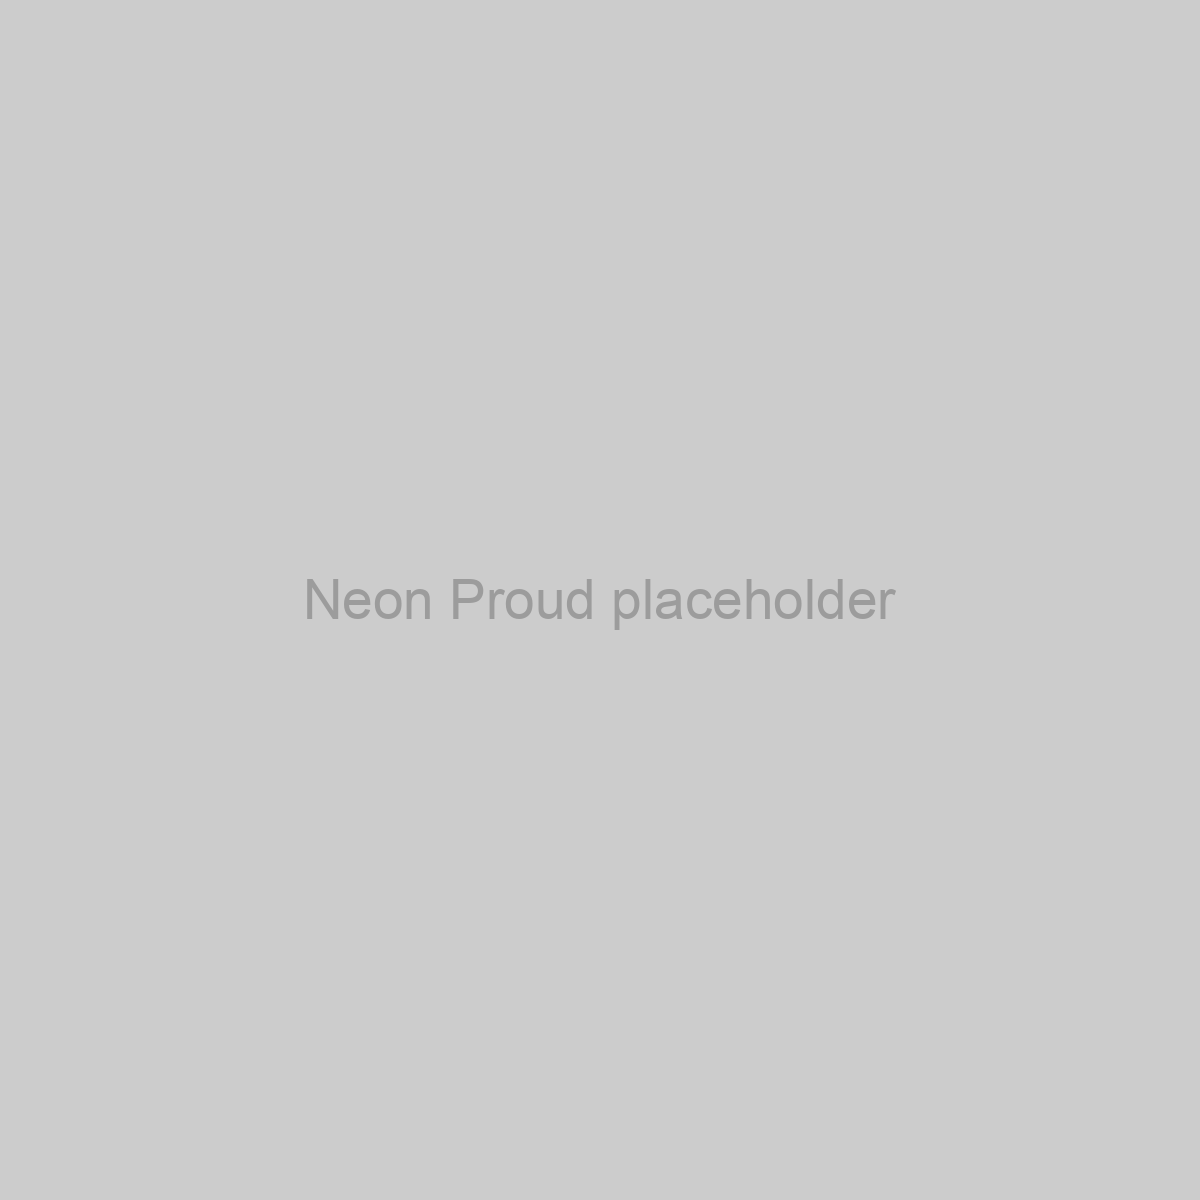 Neon Proud Placeholder Image